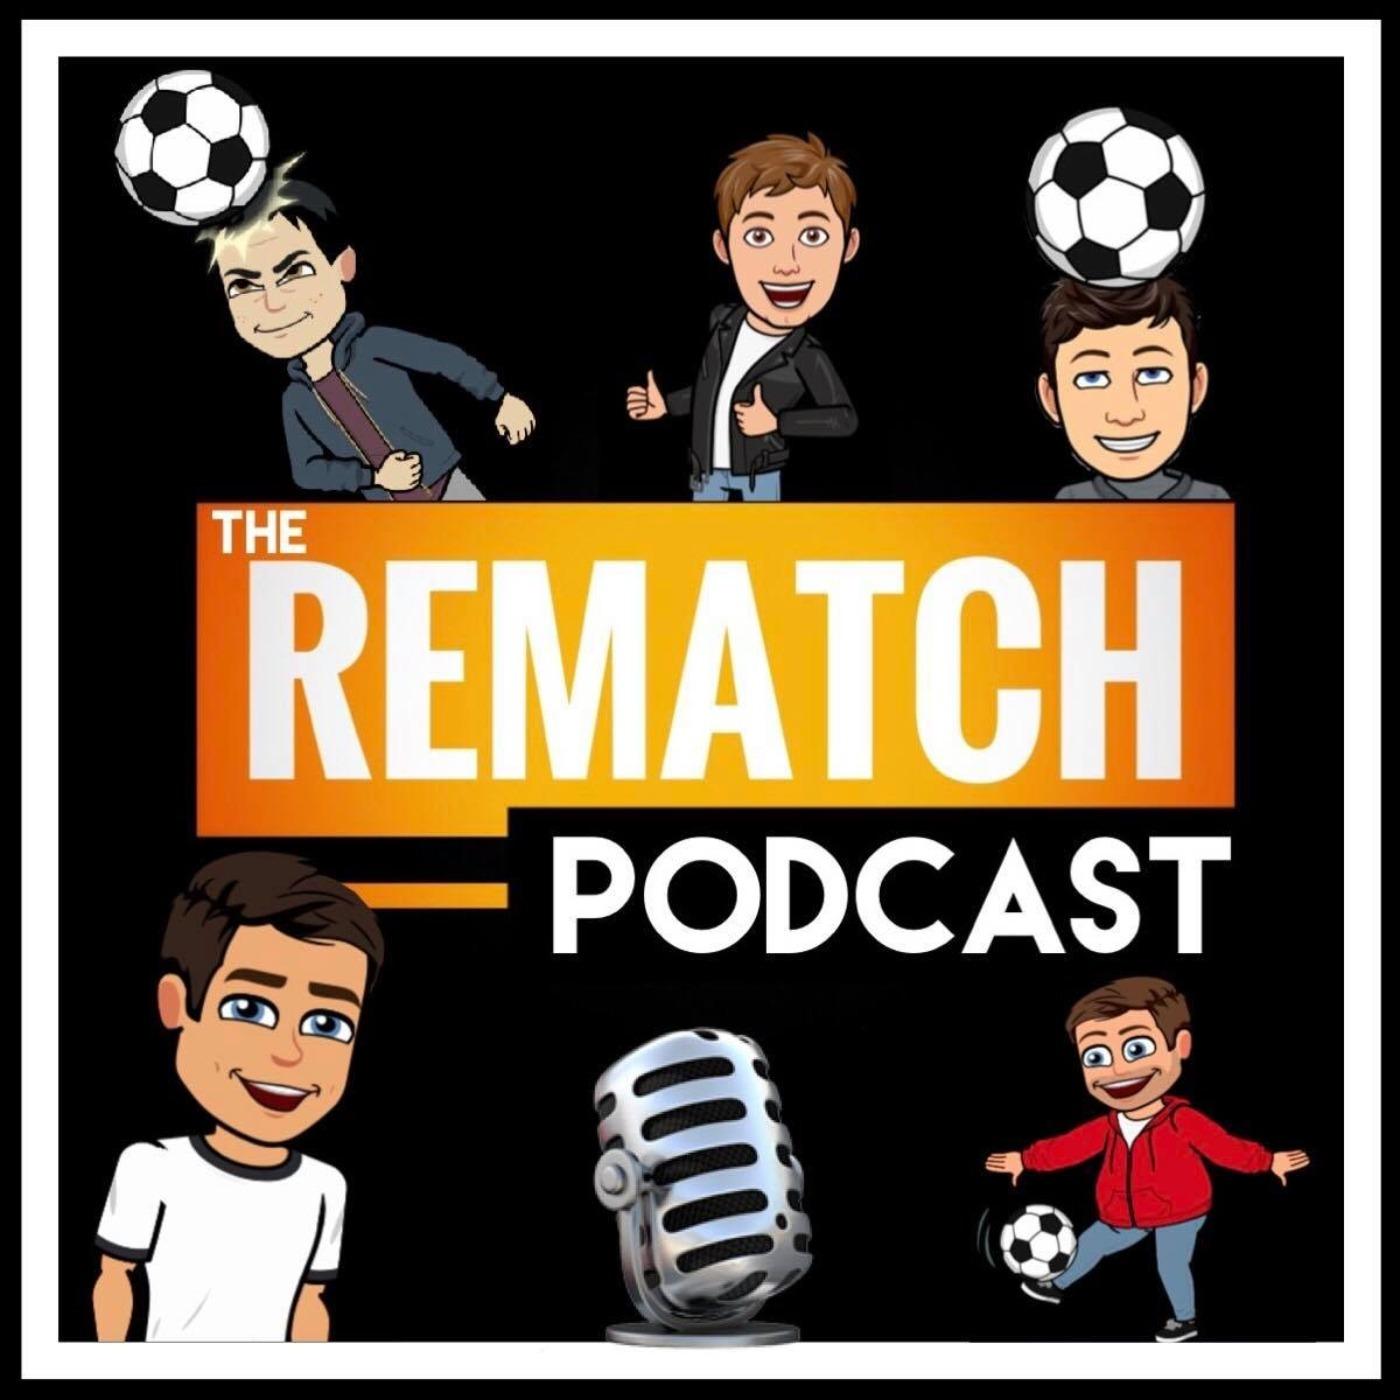 THE REMATCH PODCAST